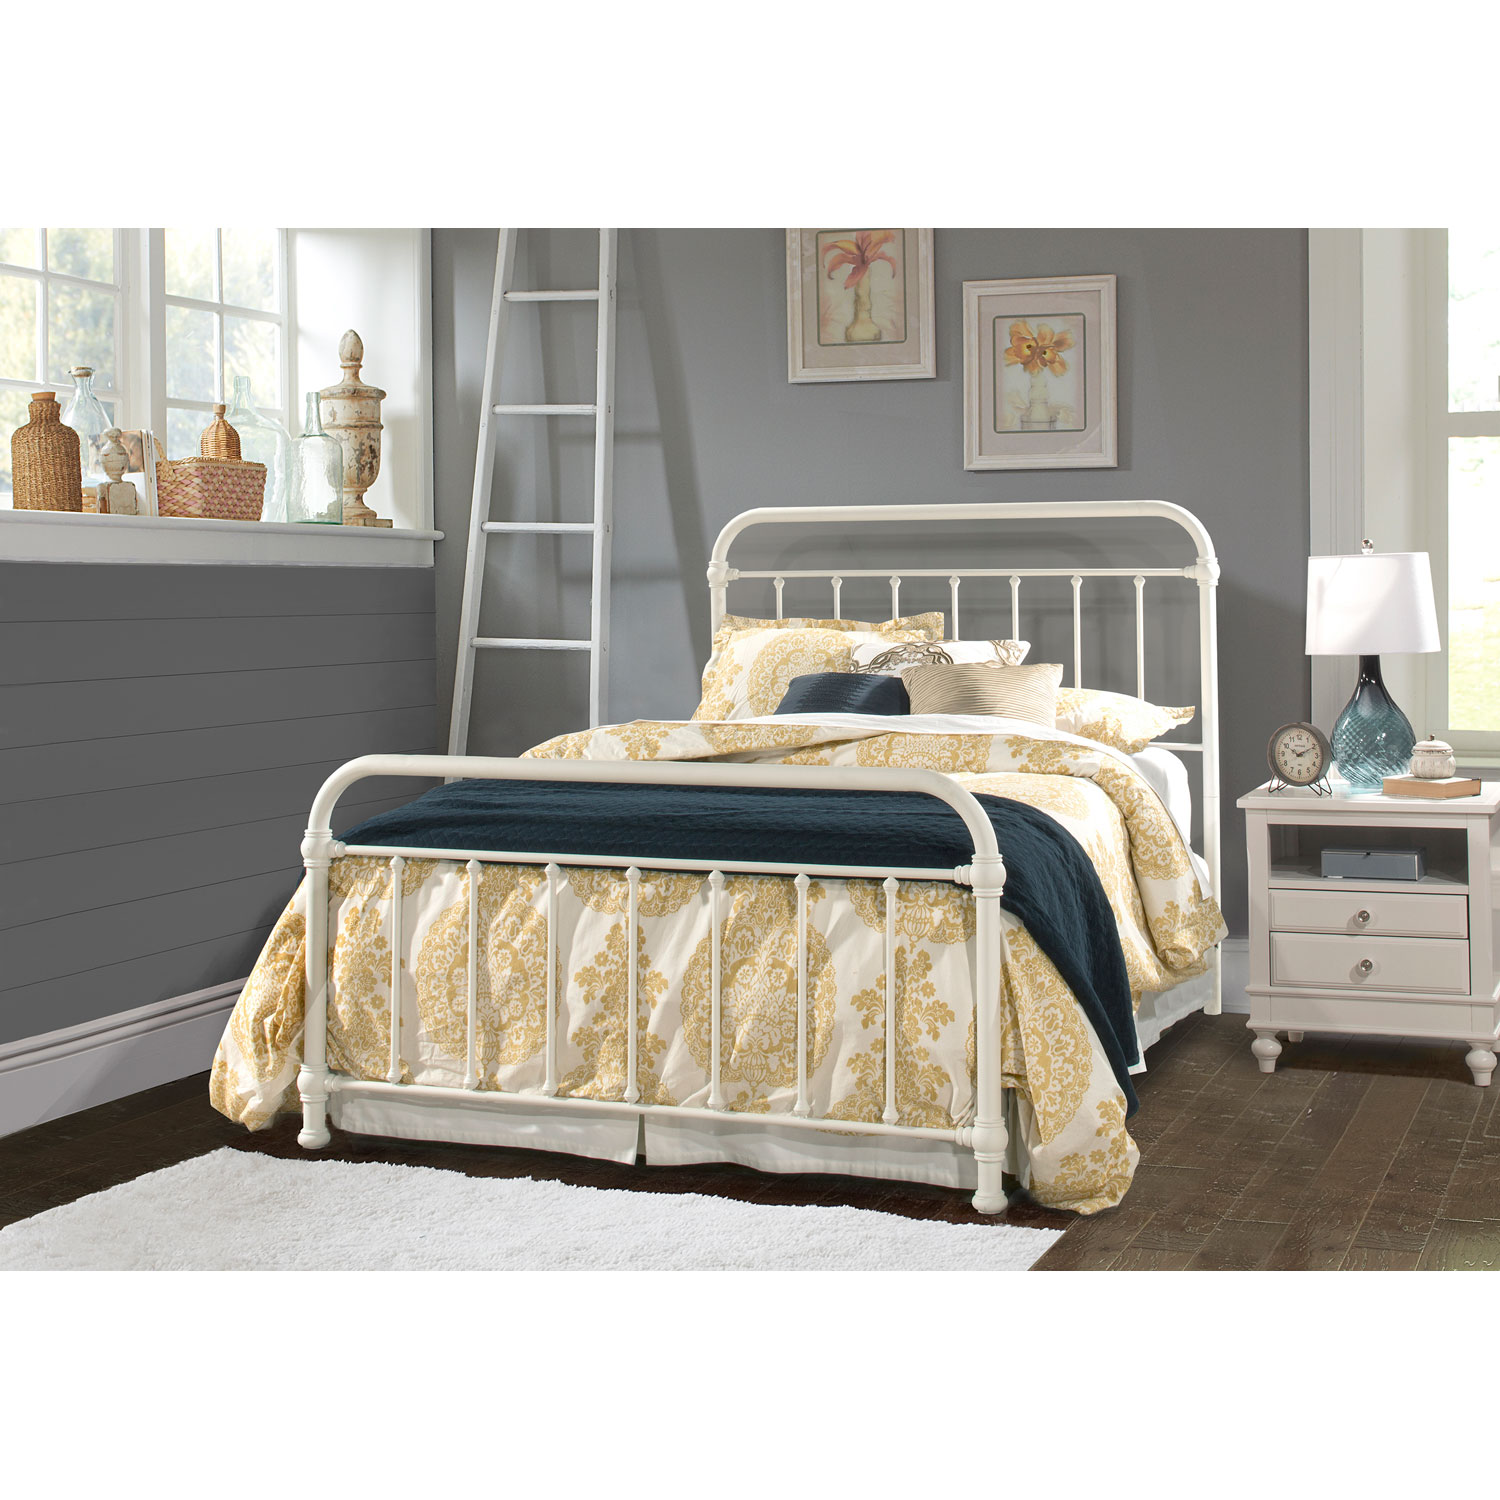 Kirkland Twin Bed Set Without Frame - Soft White